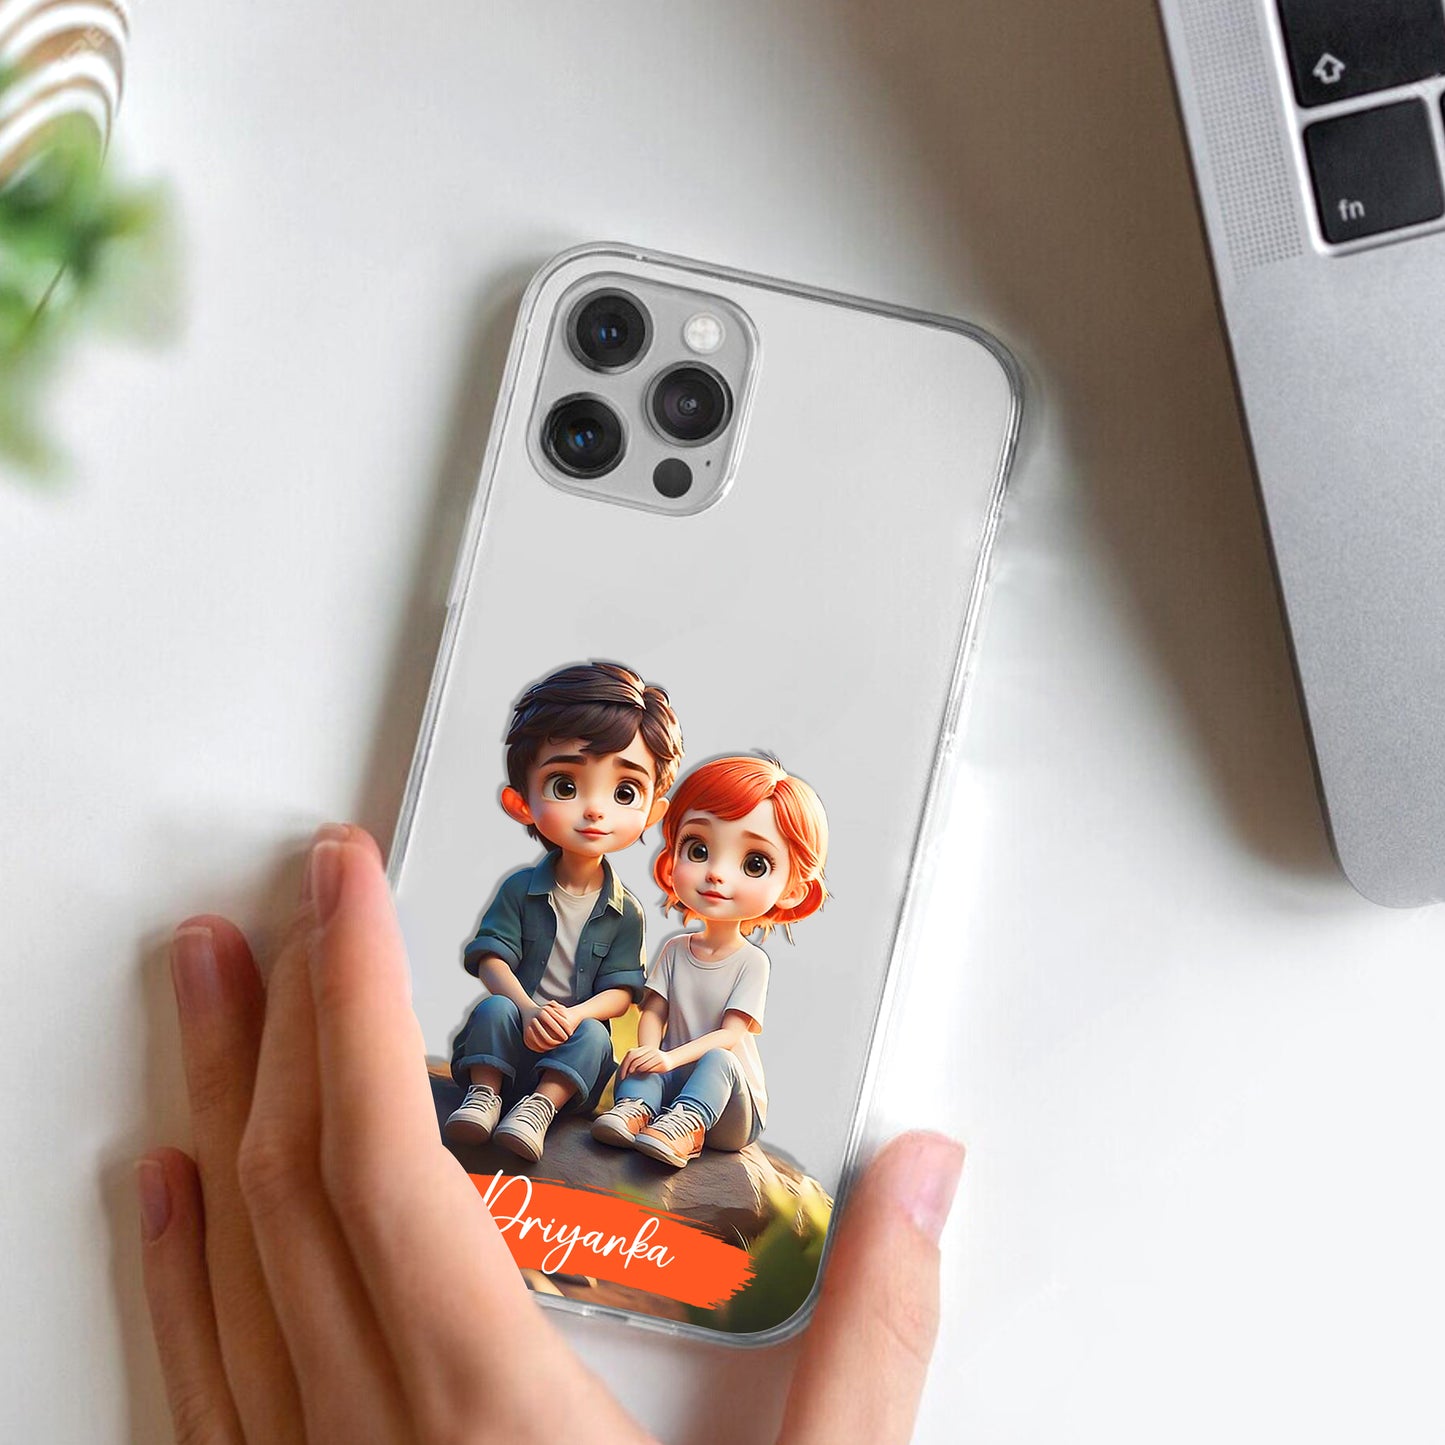 Cute Love Couple Customize Transparent Silicon Case For iPhone